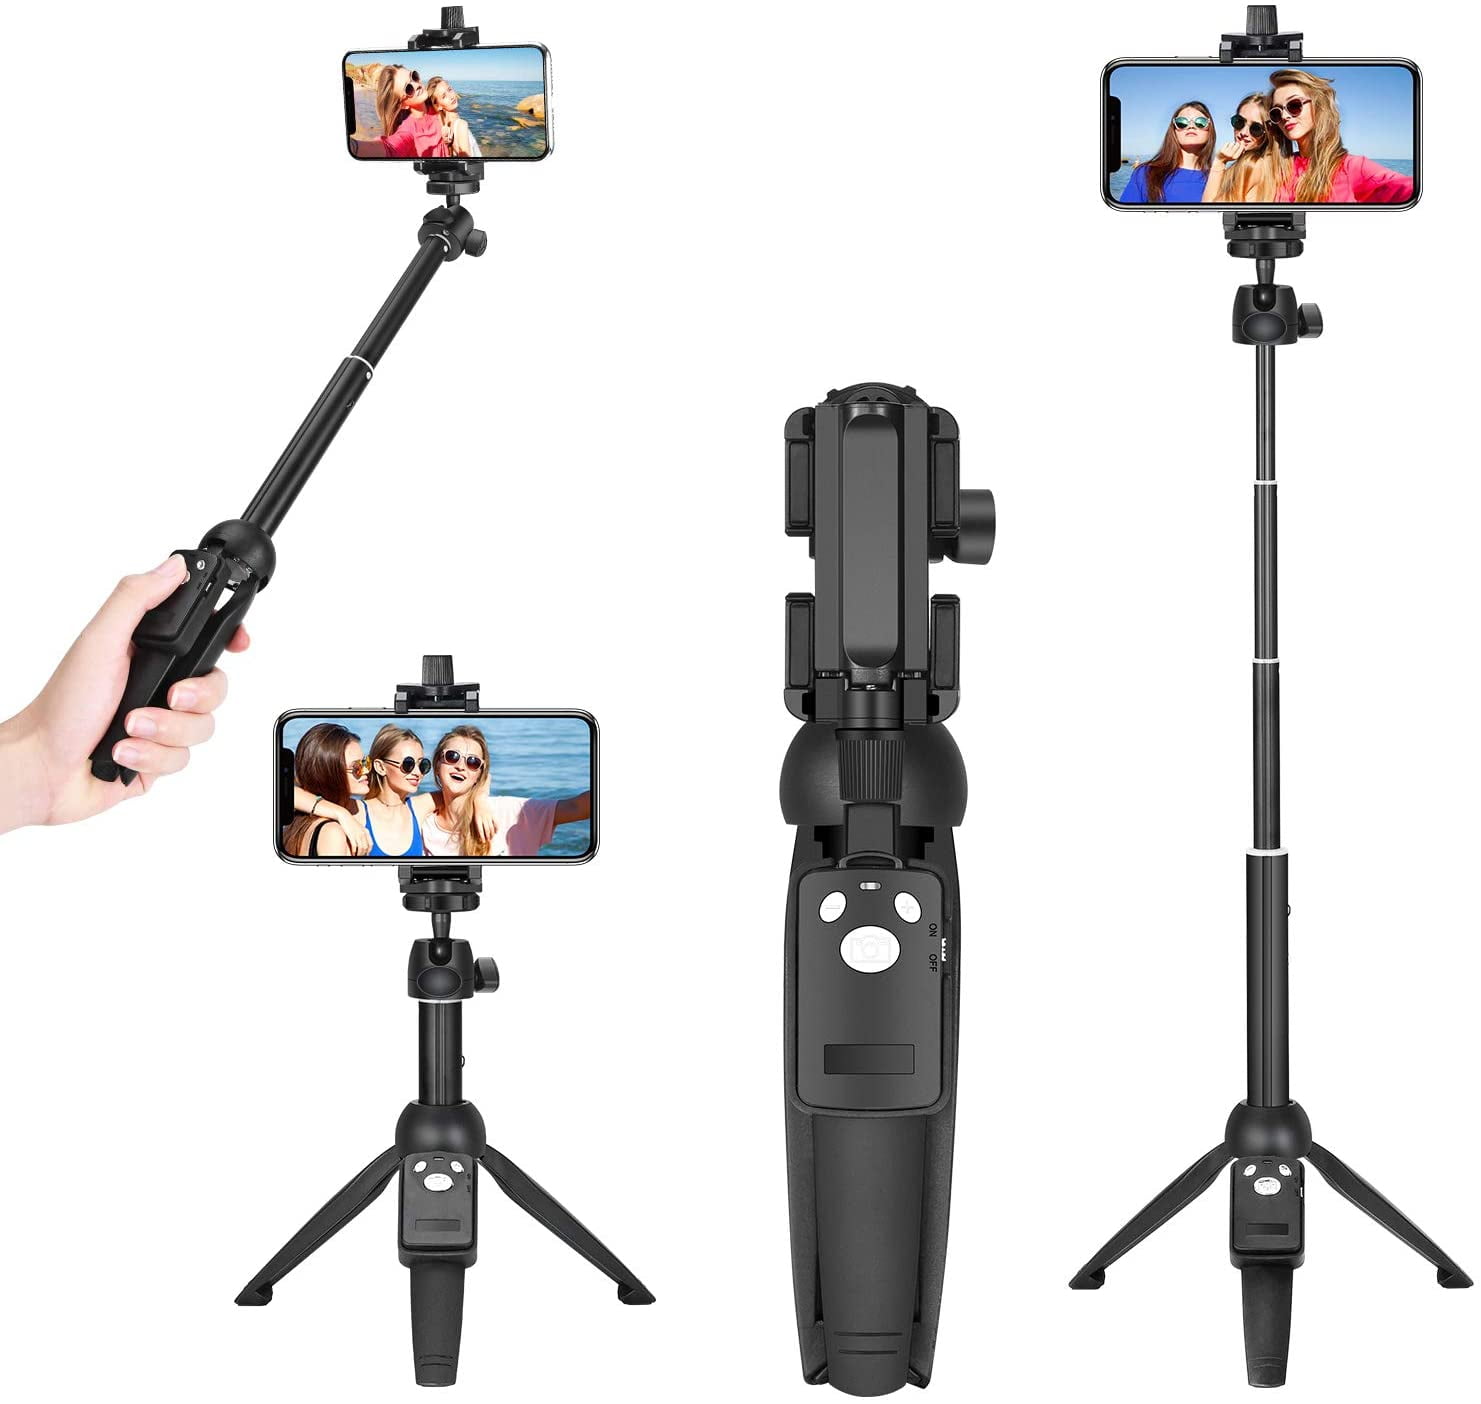 Selfie Stick Galaxy S10/S9/8 Huawei iPhone11 pro/11/XS max/XS/XR/X/8/8 plus/7/7 plus/6s Mini Selfie Stick with Bluetooth Wireless Remote for iOS & Android More Compatible with Small Camera 